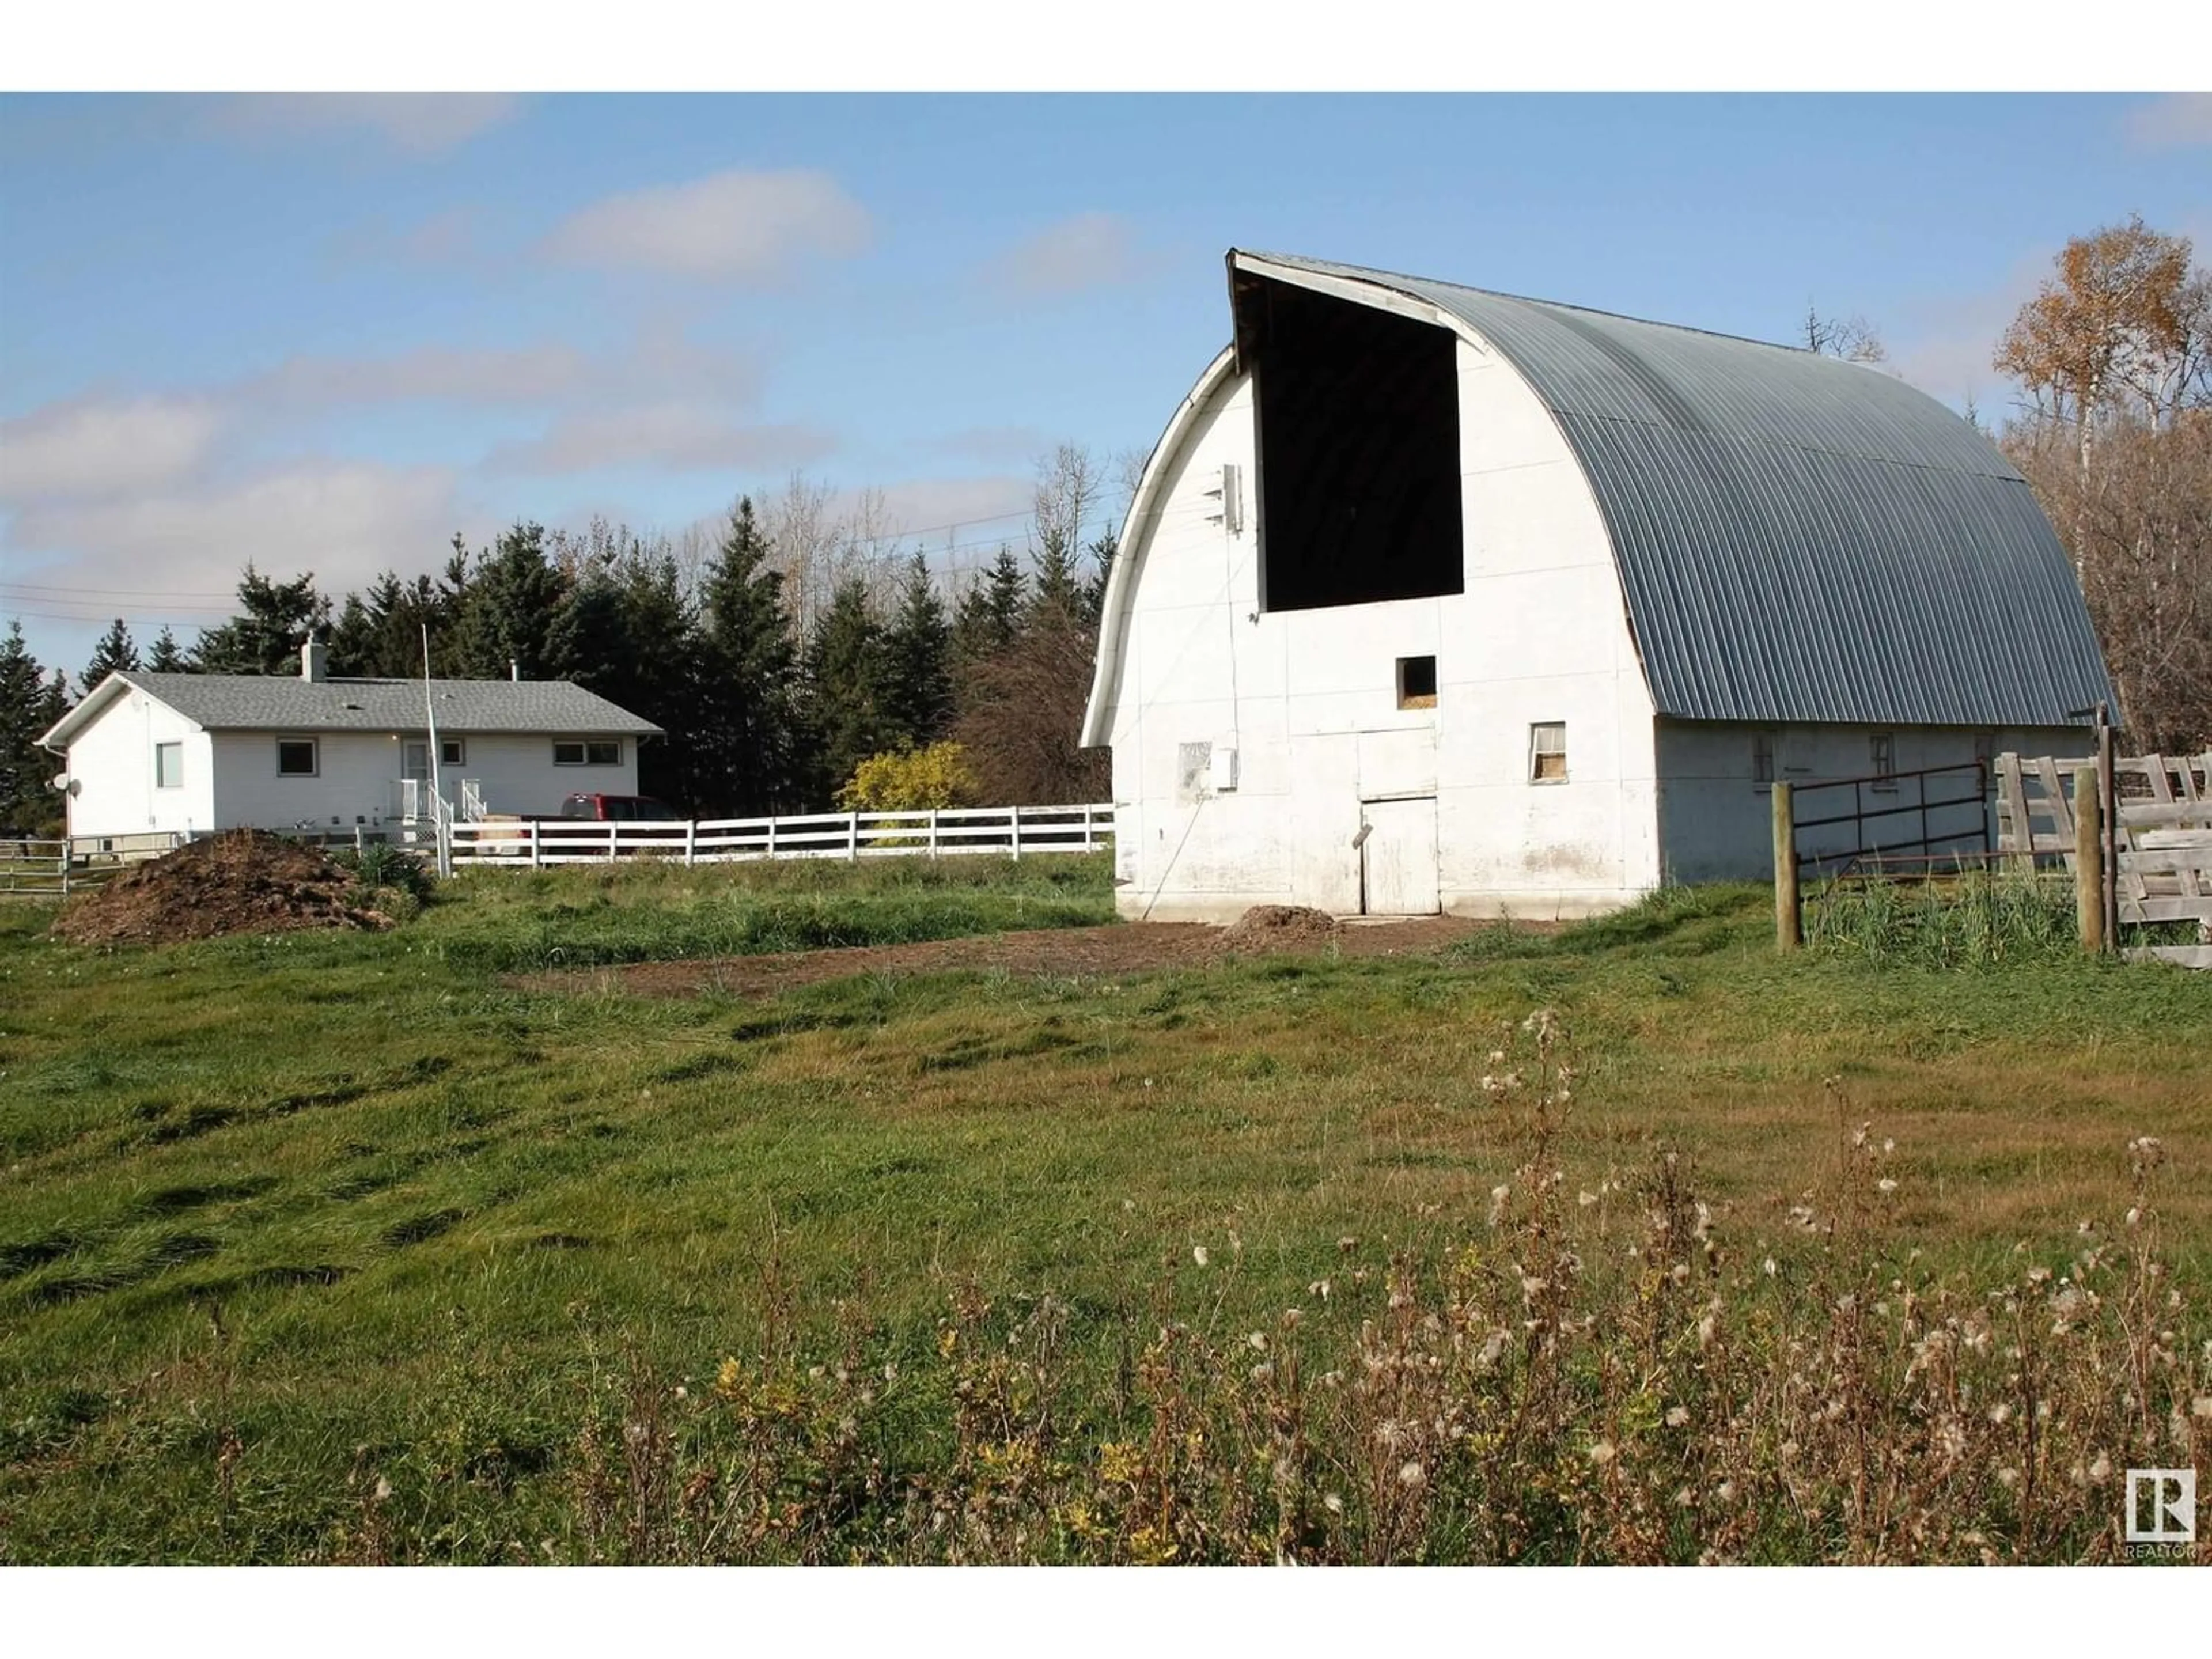 Shed for 58325 Hwy 44, Rural Westlock County Alberta T7P2P5